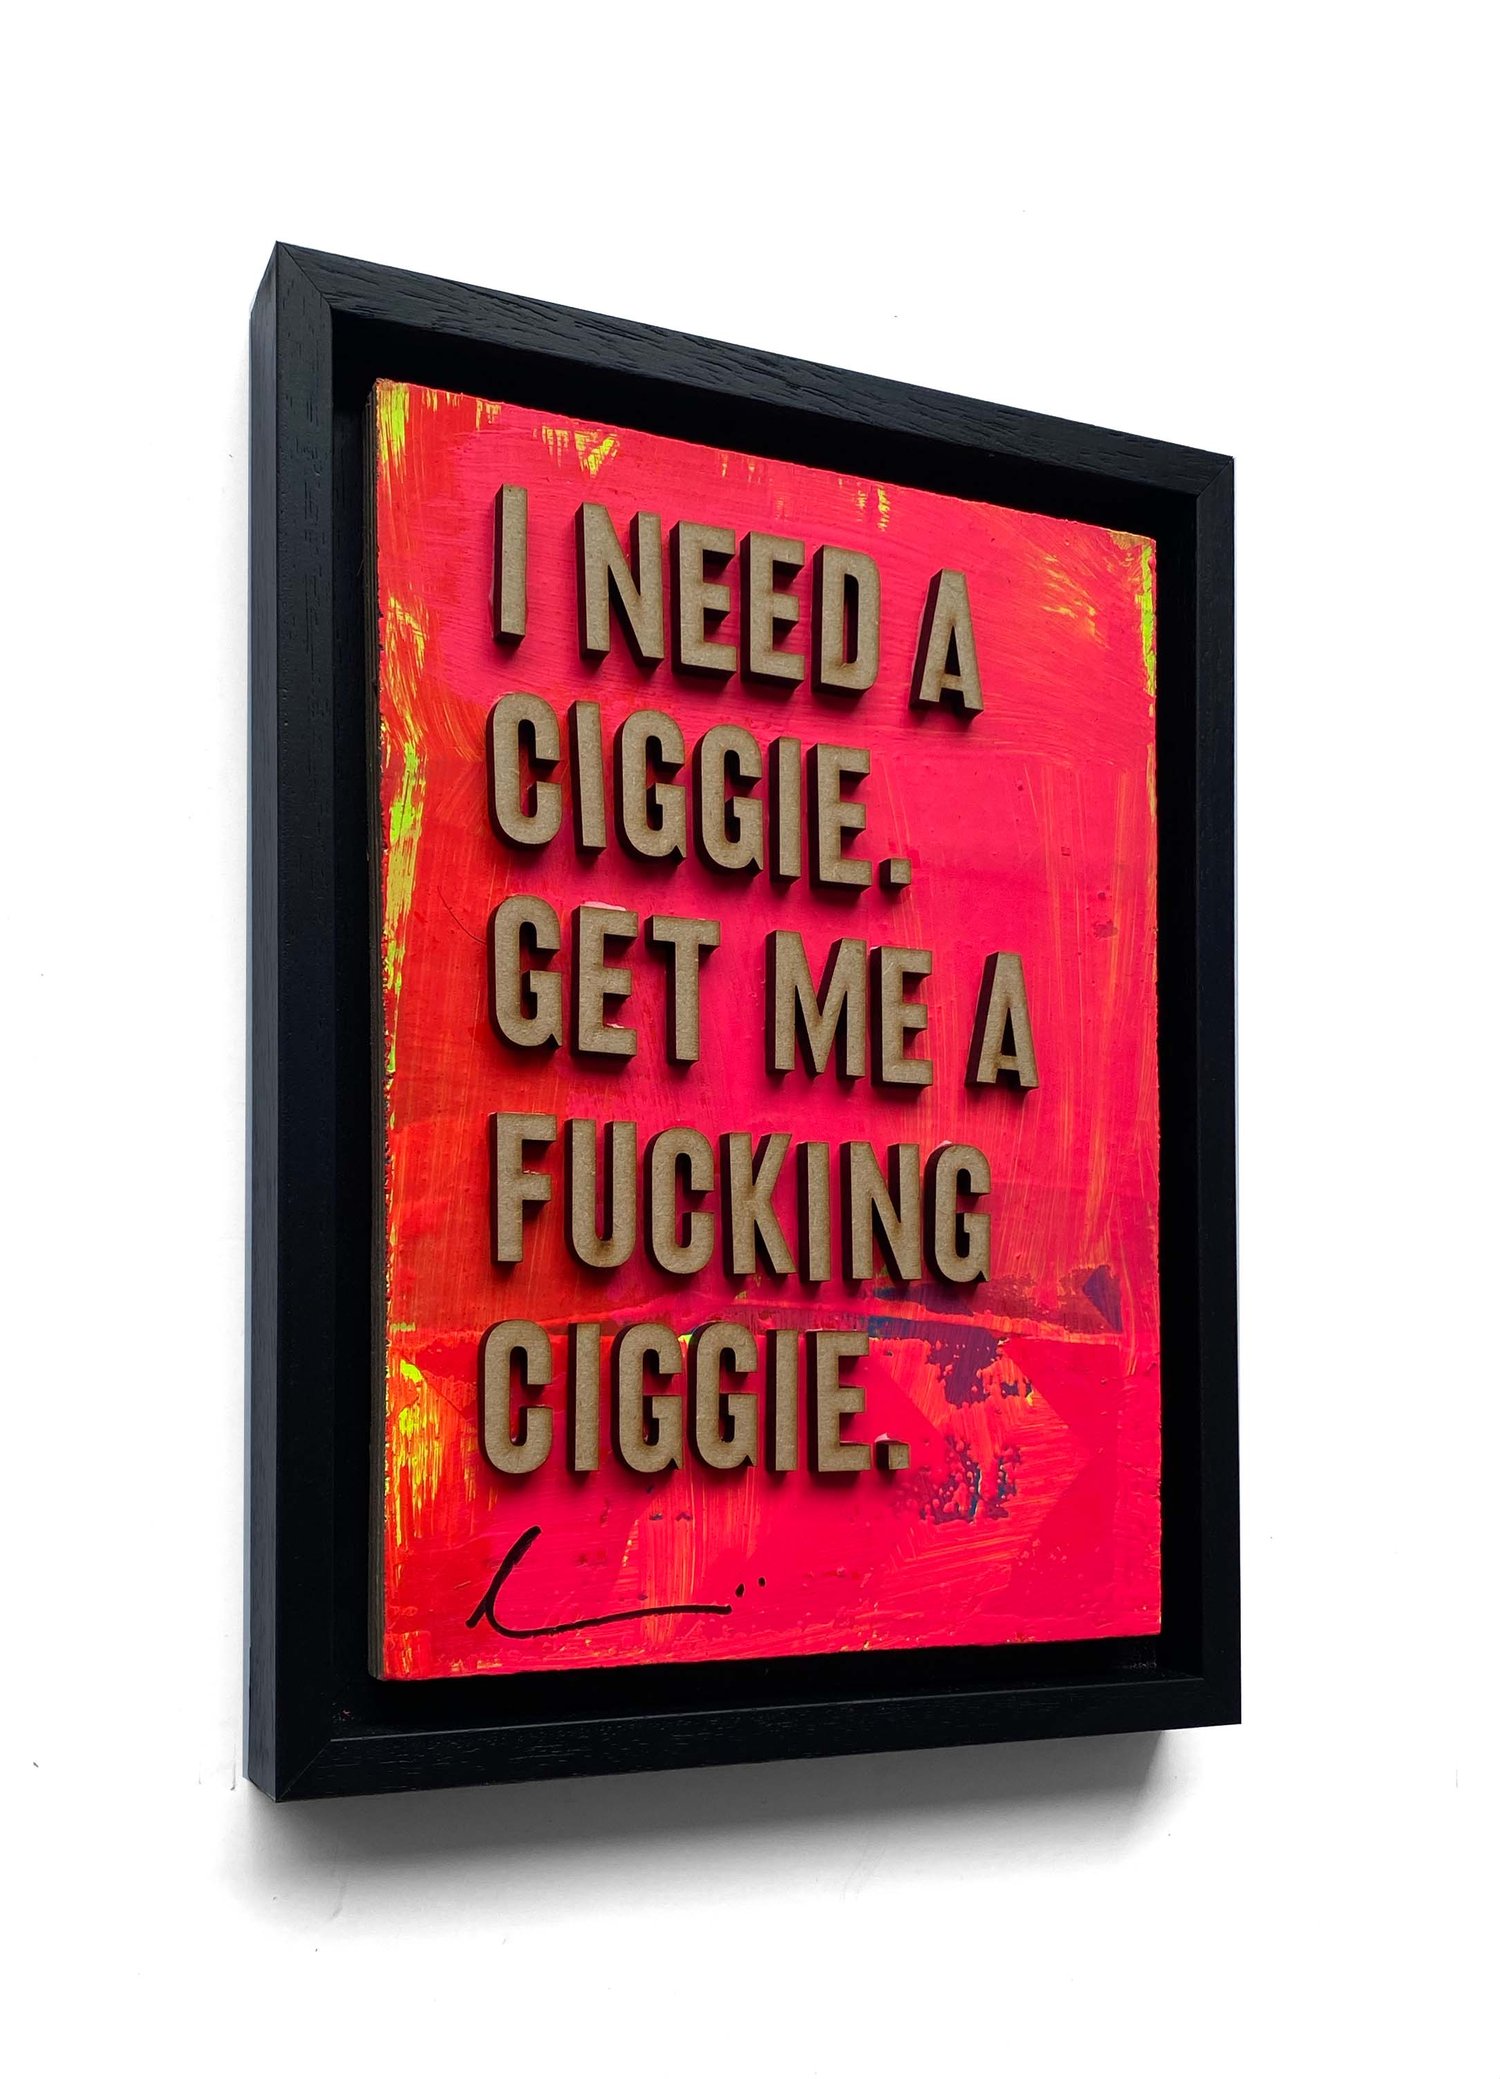 Image of 'I need a ciggie. Get me a fucking ciggie' by Hackney Dave